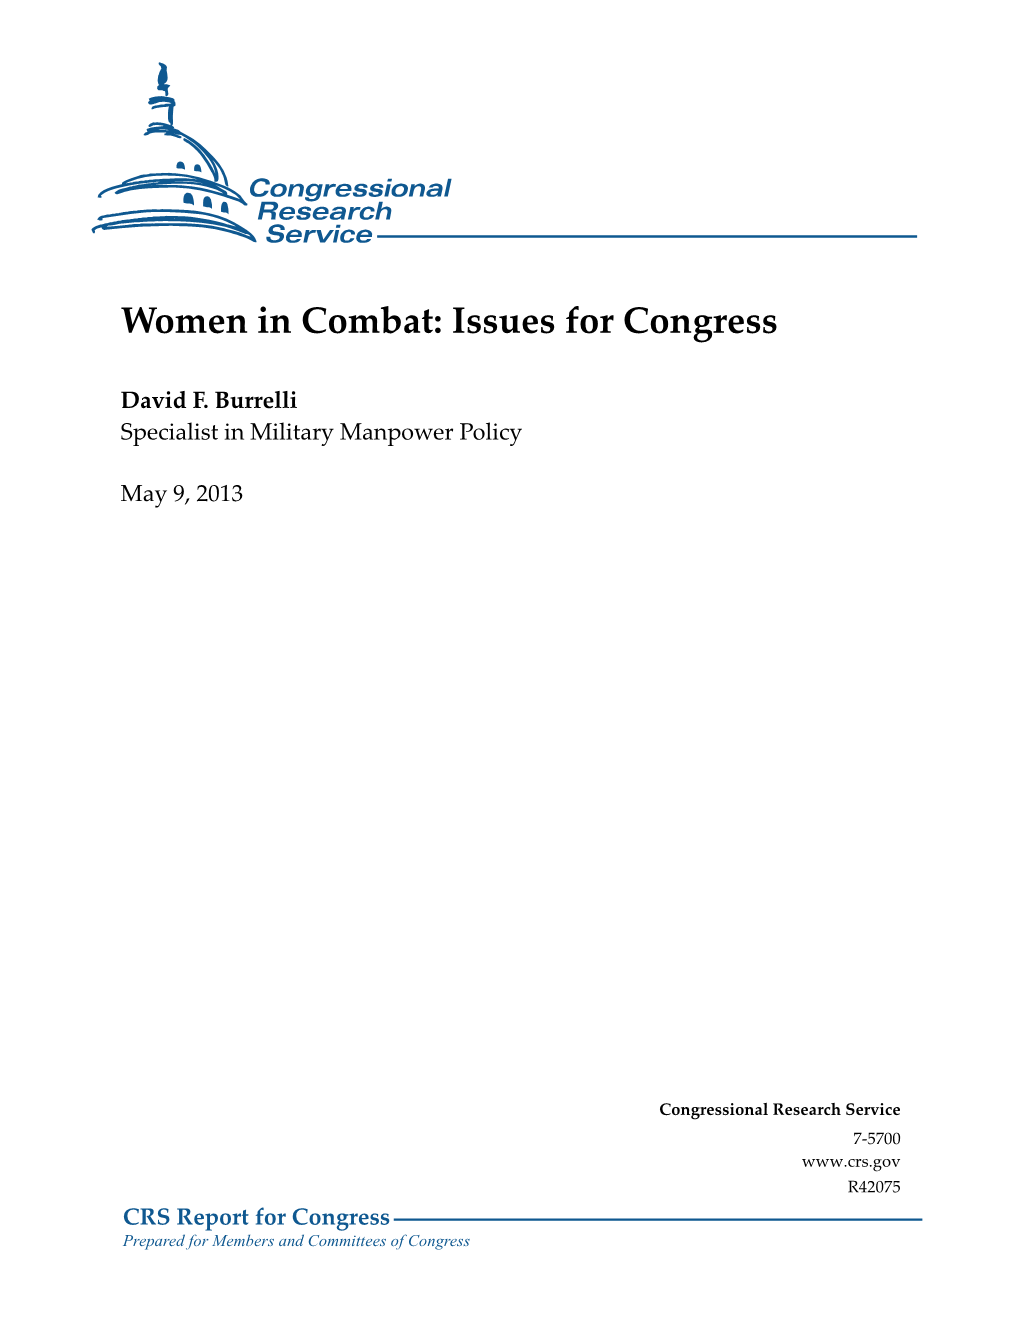 Women in Combat: Issues for Congress